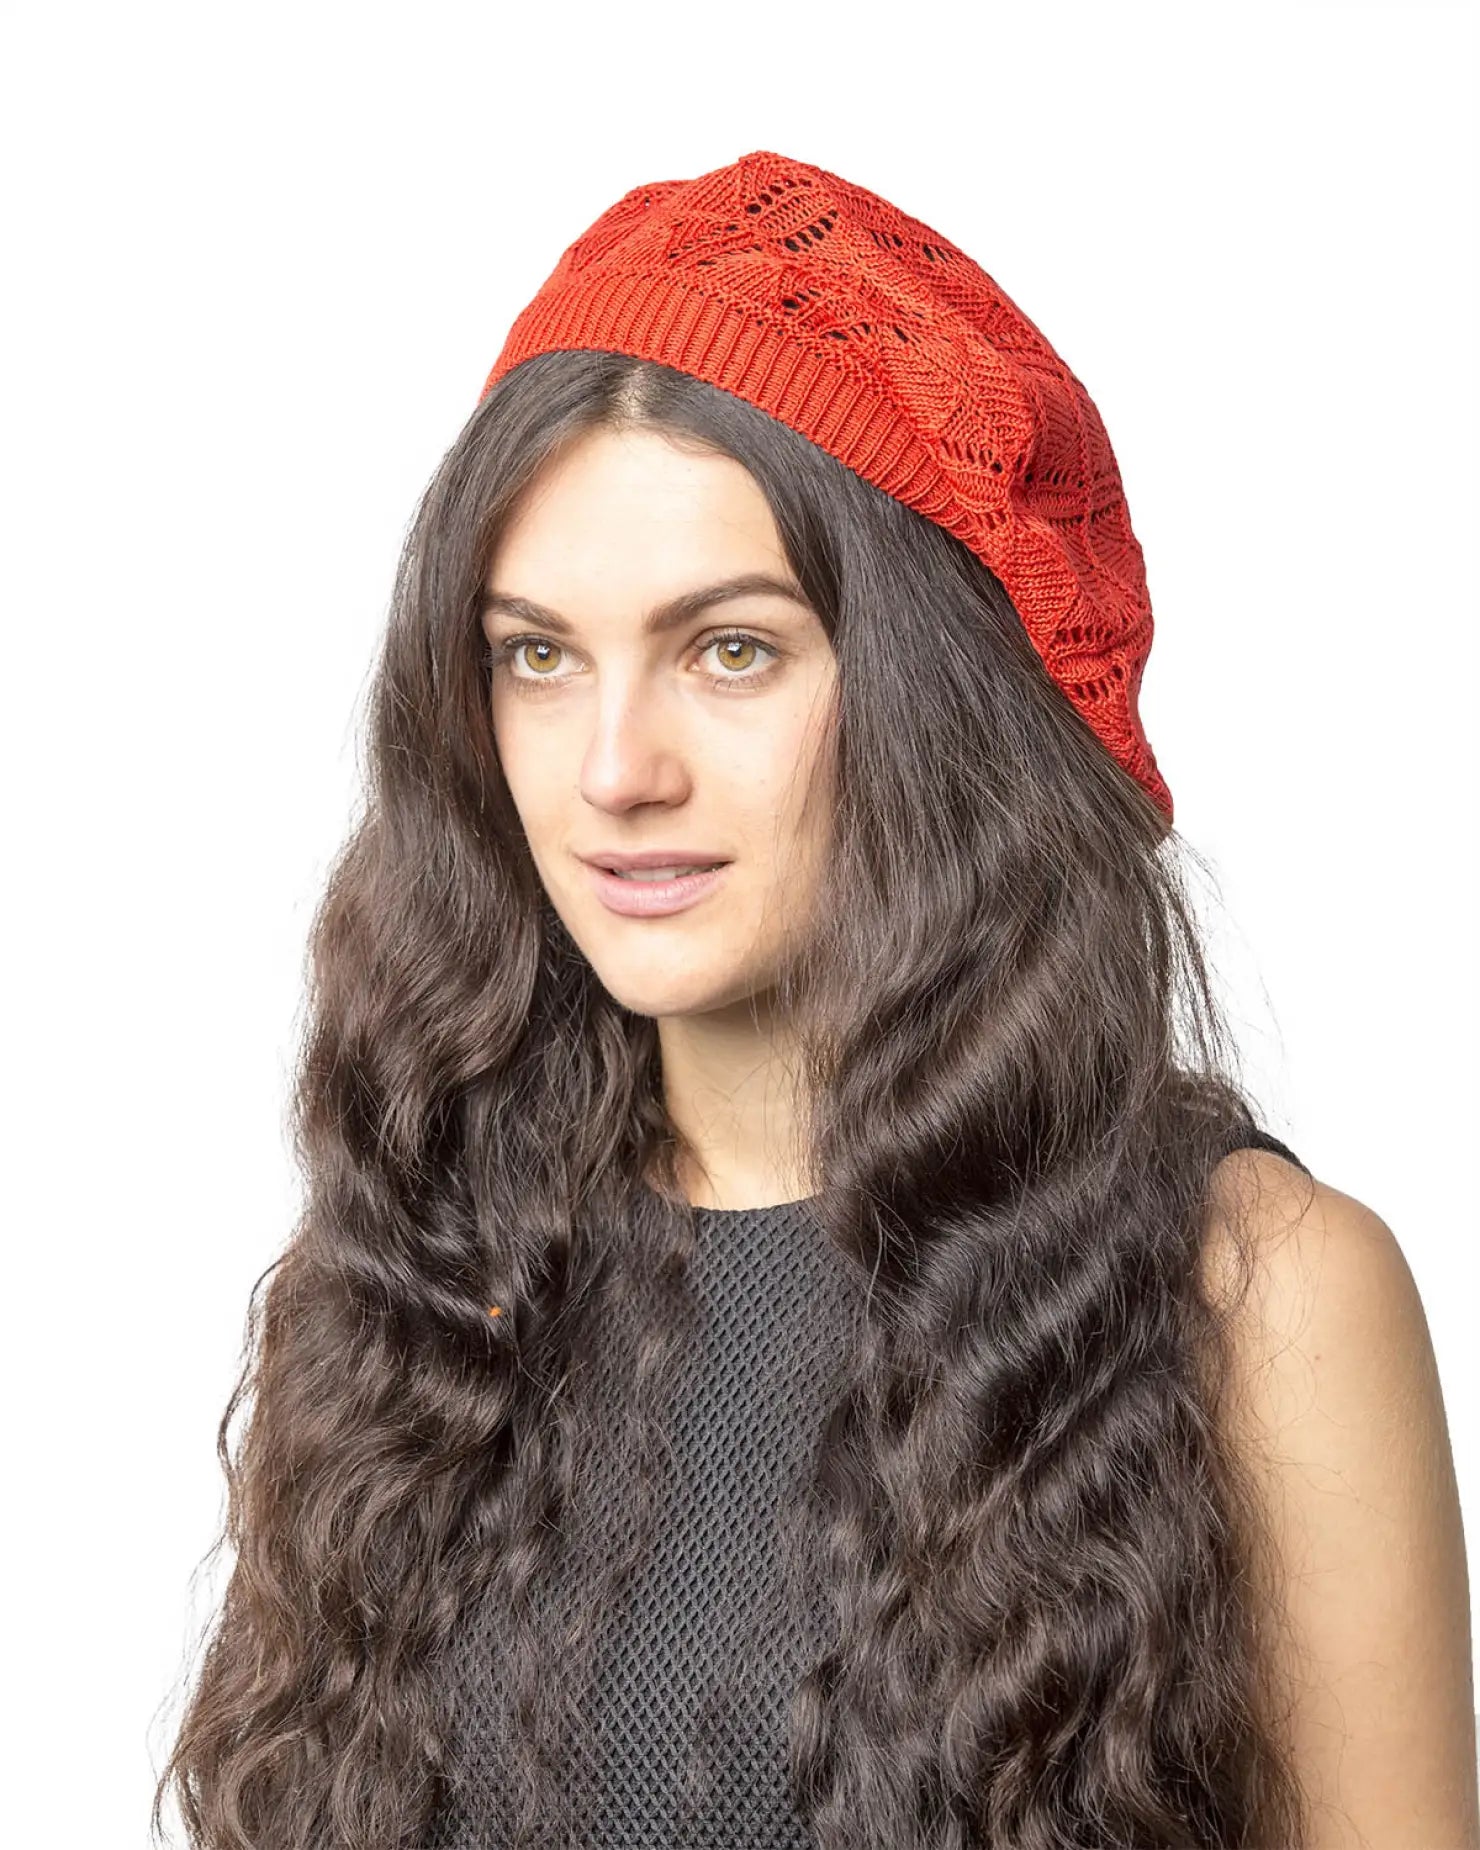 Woman wearing red knit hat from Women’s Leaf Design Knitted Crochet Beanie Hat